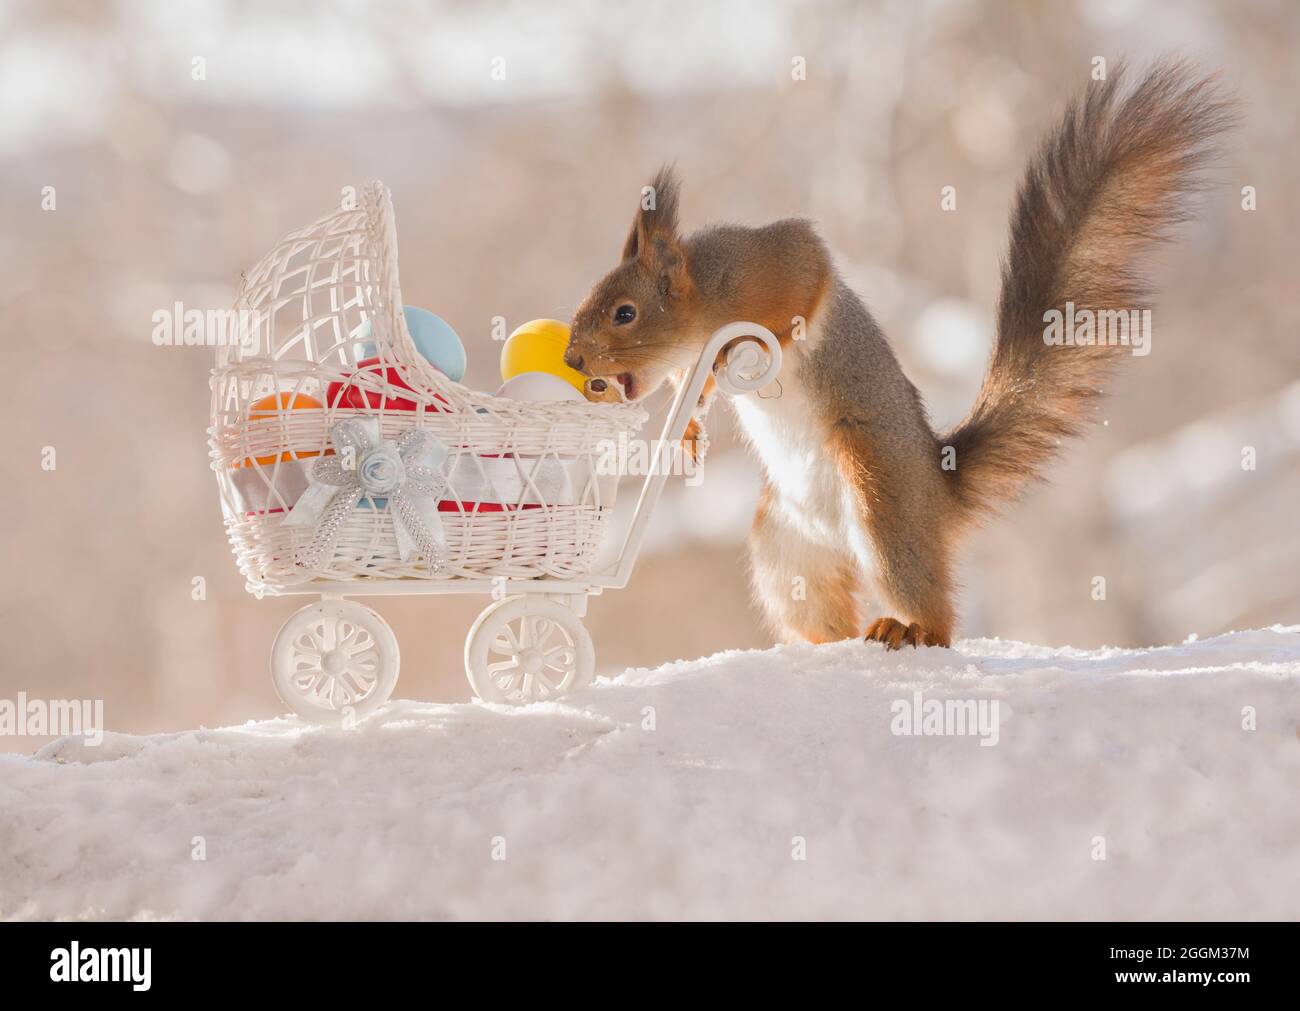 red squirrel with an stroller and eggs Stock Photo